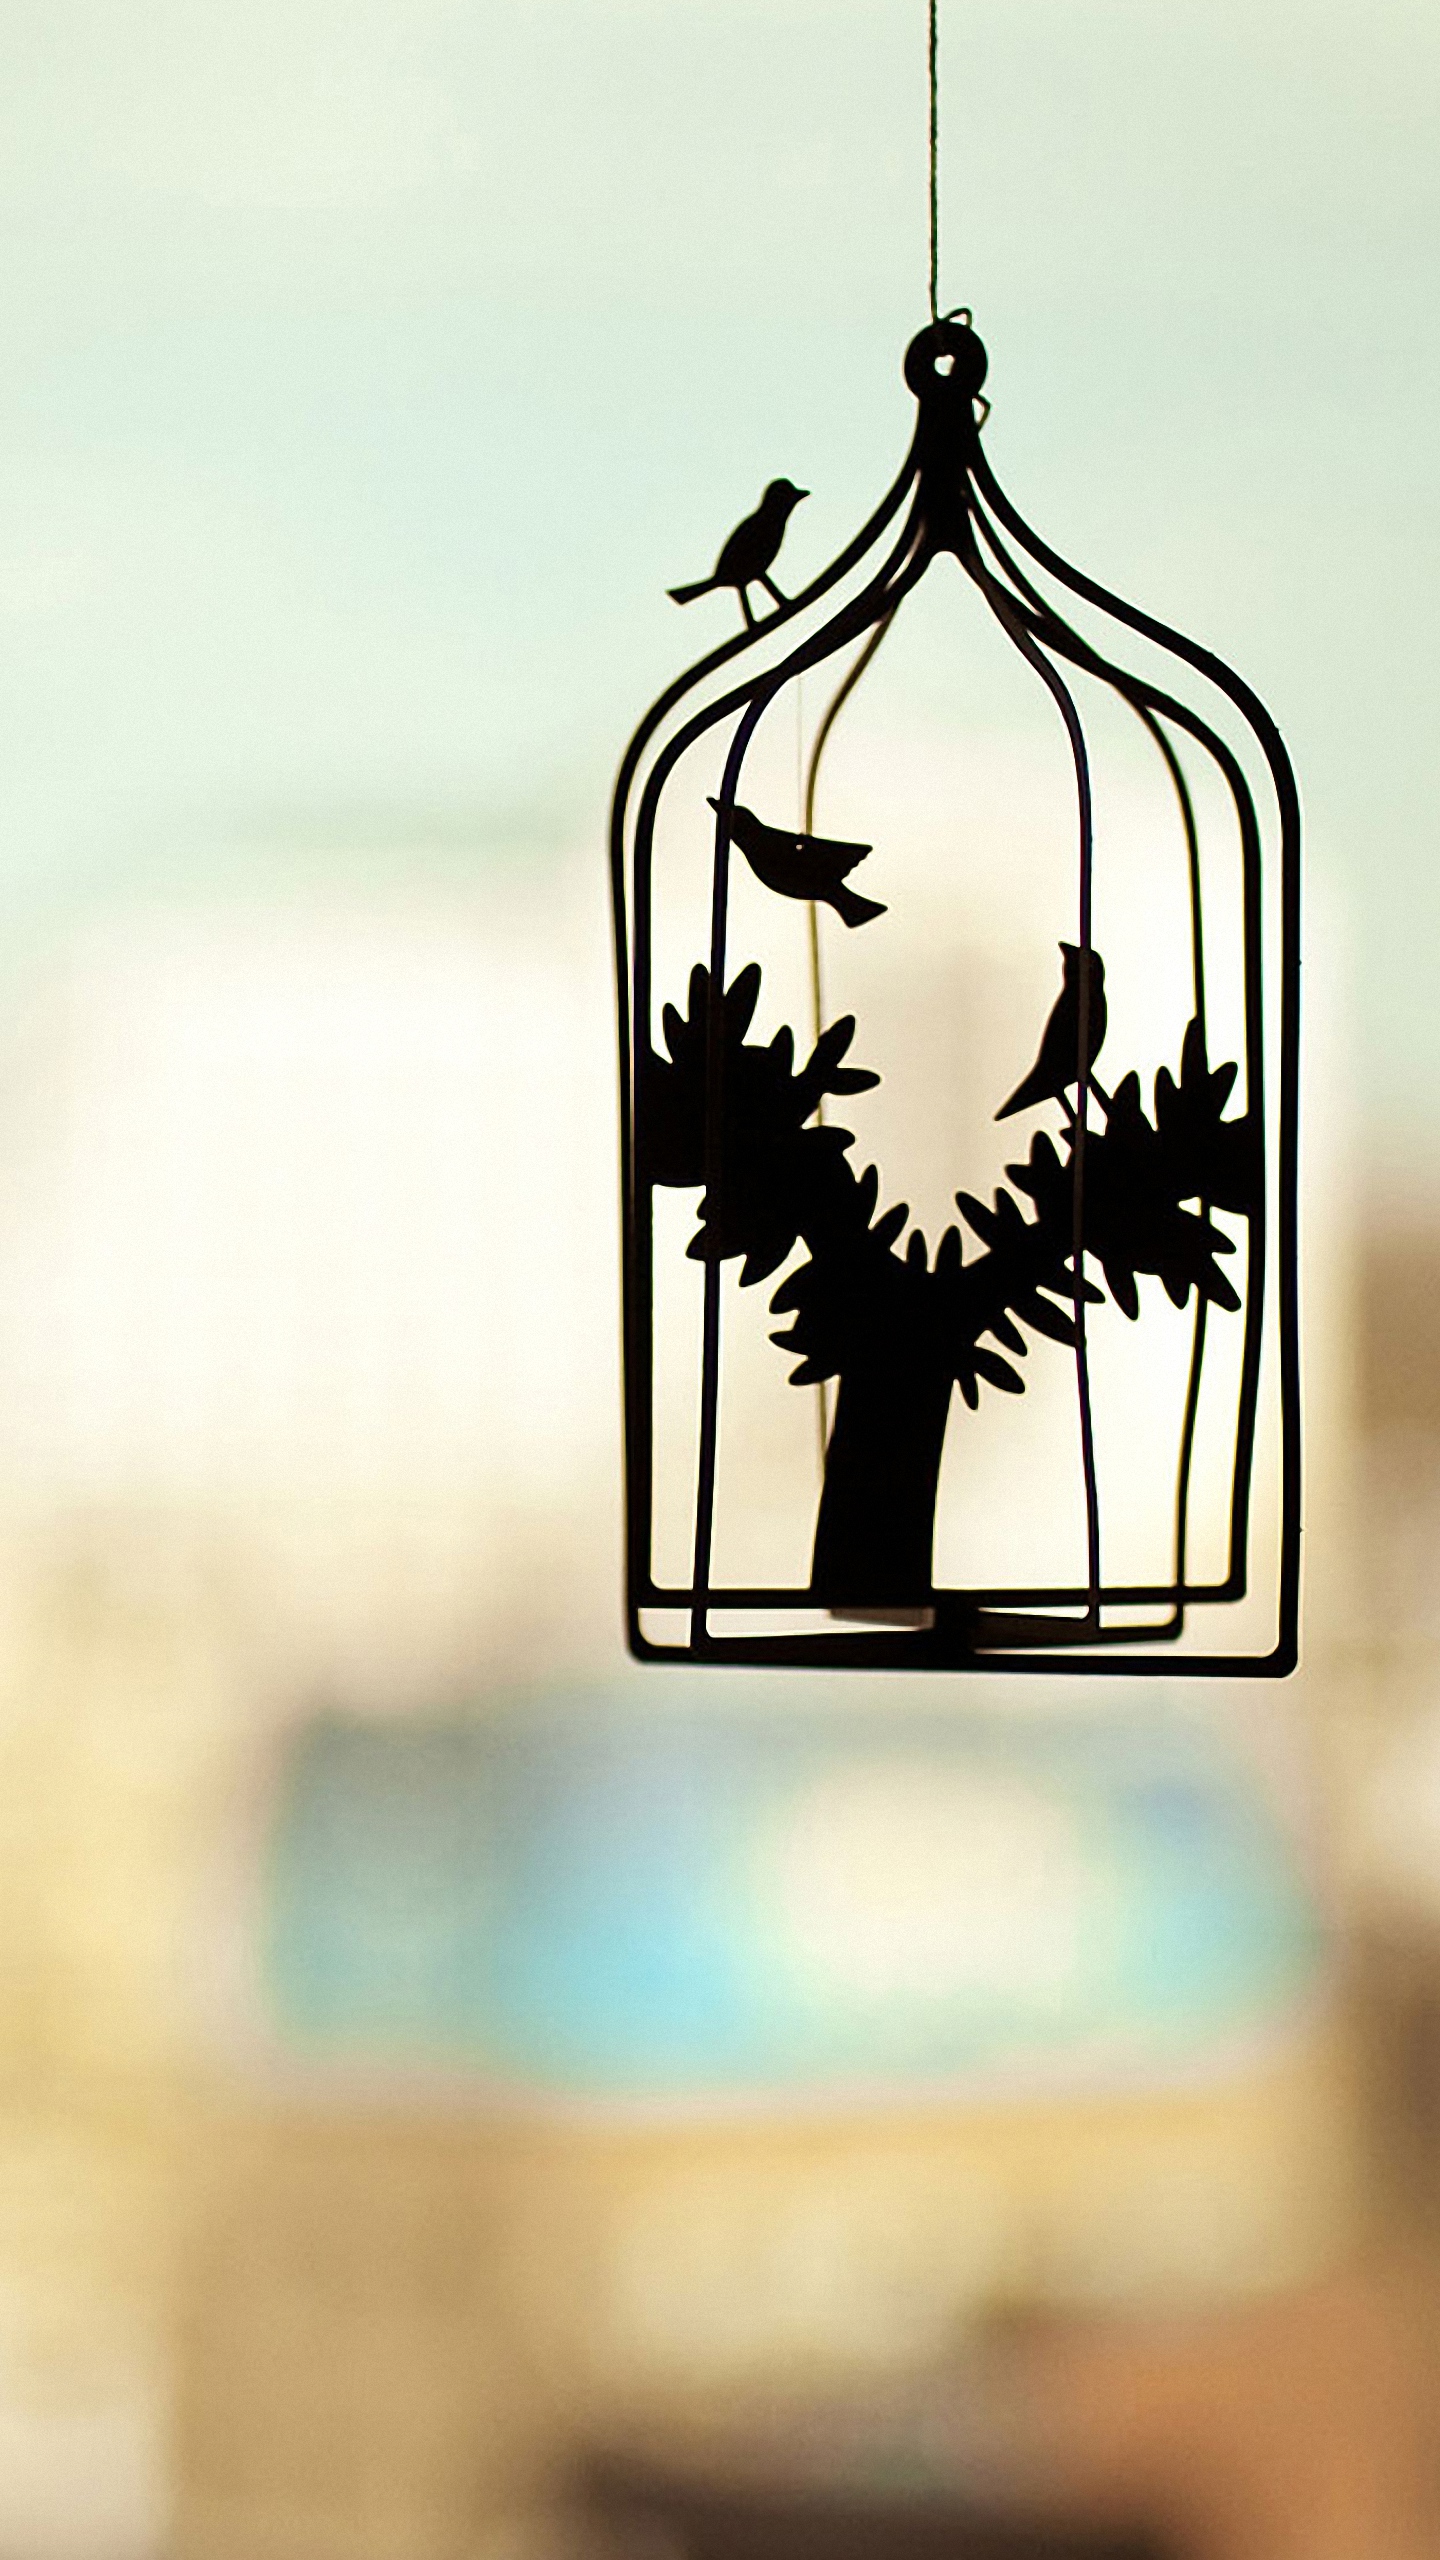 Your Lg G4 HD Abstract Birdcage Wallpaper